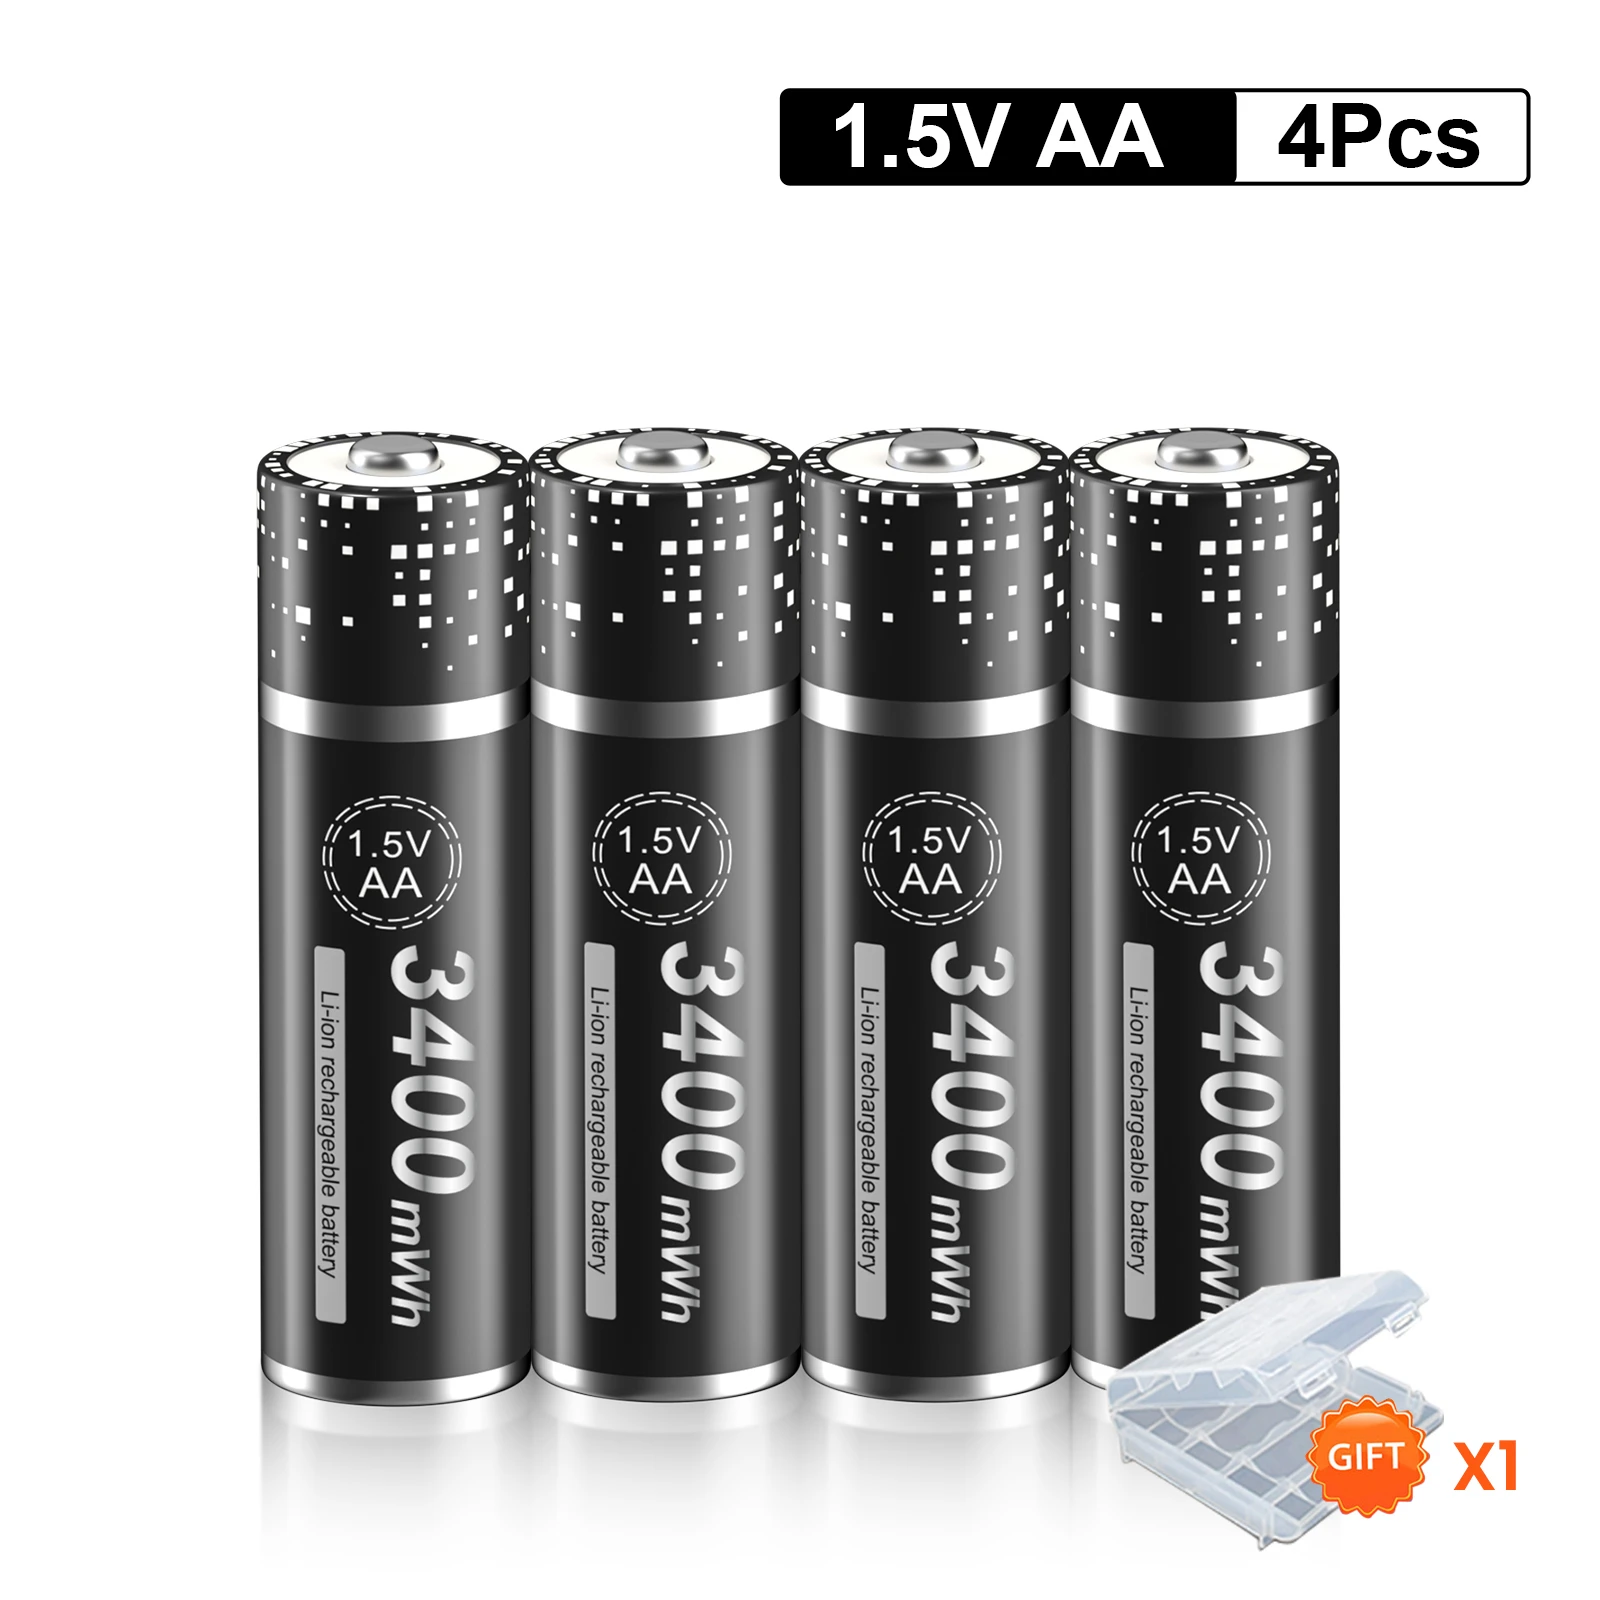 

PALO Li-ion 1.5V AA Rechargeable Battery 2A 1.5 Volts Lithium Batterie For Clocks, Mice, Computers Toys Car